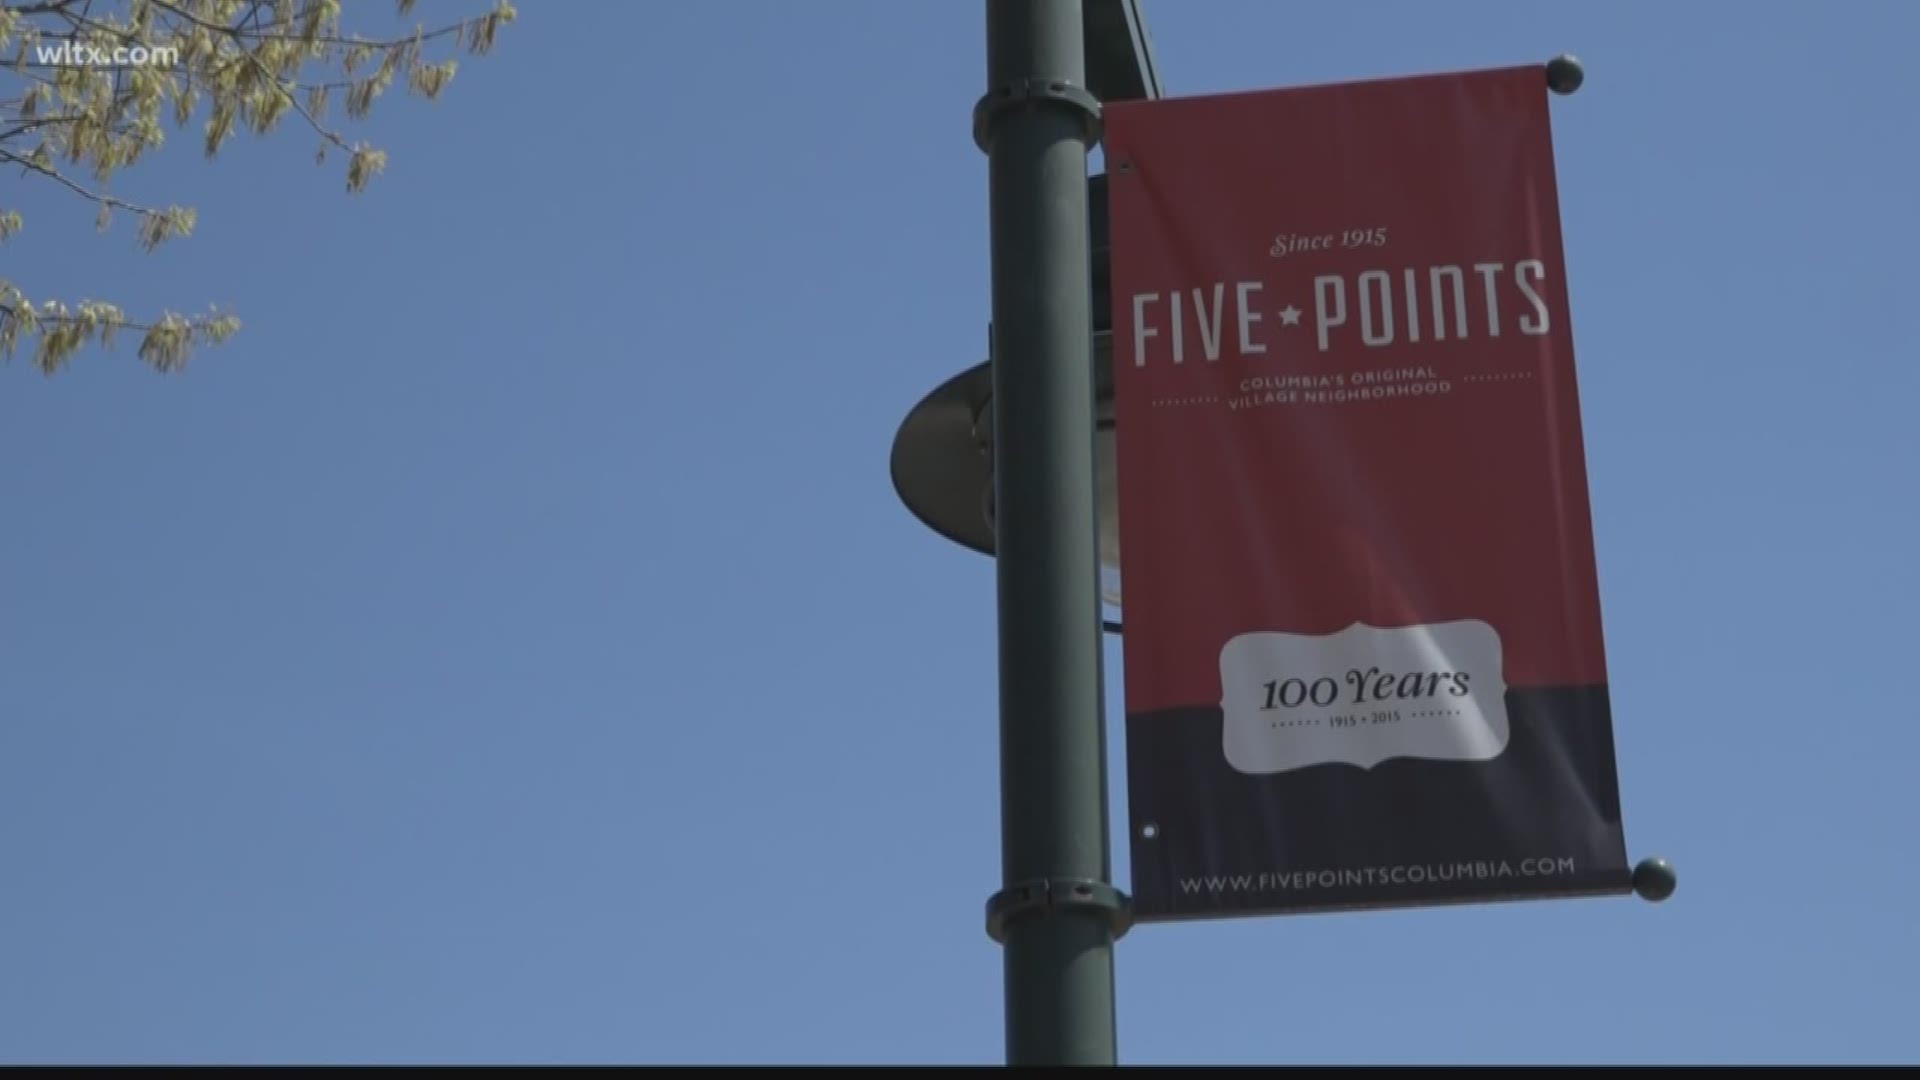 The mentality of both the Five Points community and its patrons is changing in the wake of the death of a University of South Carolina student.